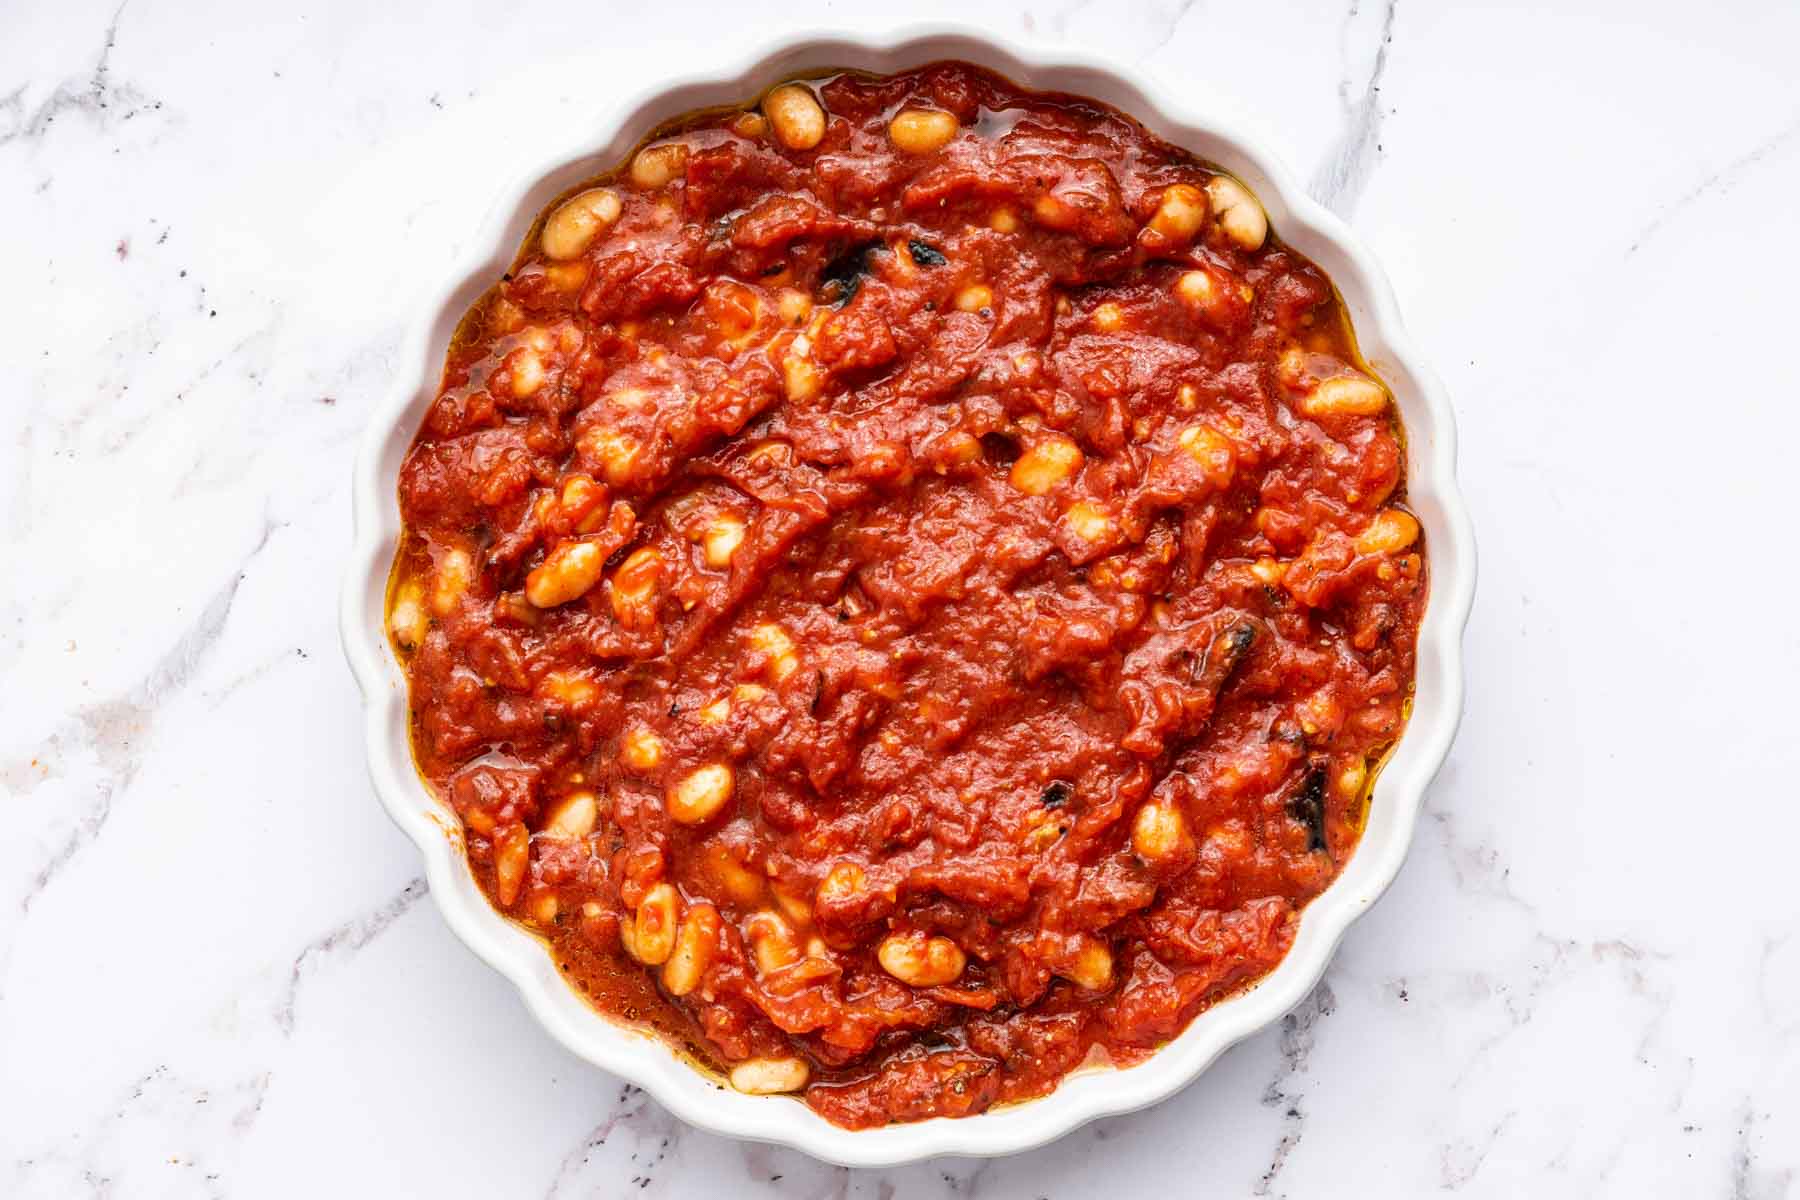 Round dish full of canned tomatoes.